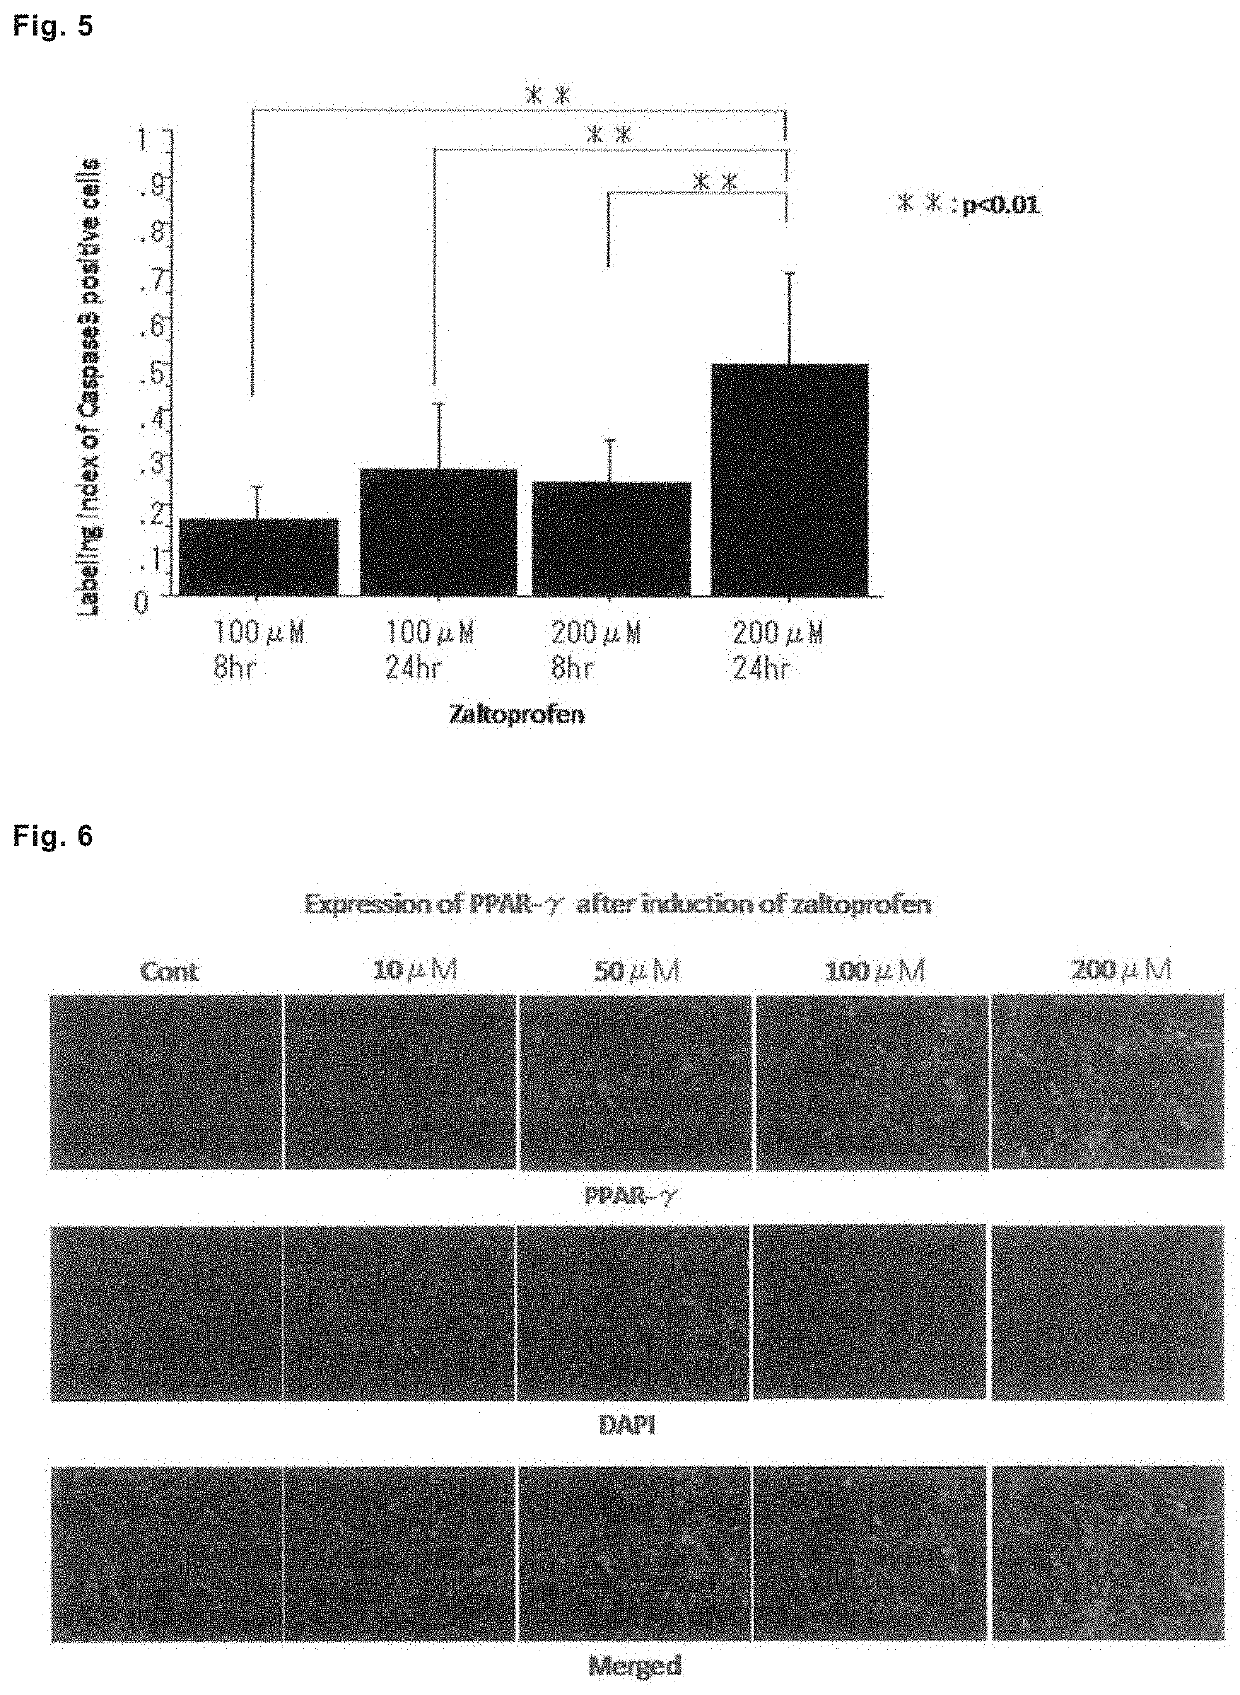 Drug for preventing, treating or preventing metastasis of giant cell tumor that occurs in bone or soft parts, chondrosarcoma, or osteosarcoma, local injection for arterial embolization, and artificial bone